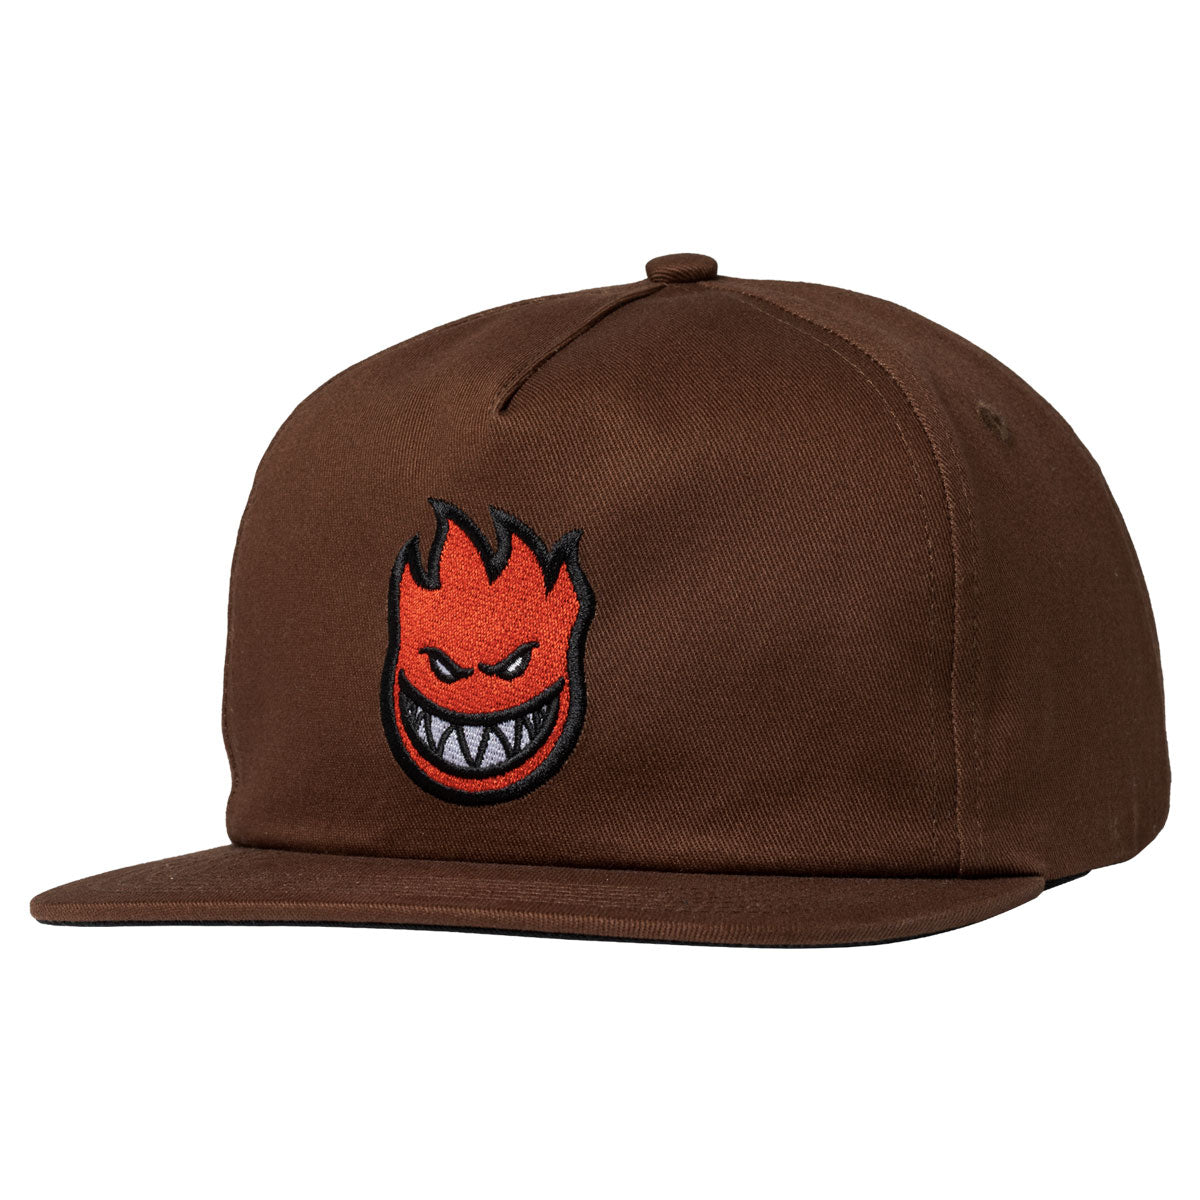 Spitfire Bighead Fill Snapback Hat - Brown/Red image 1